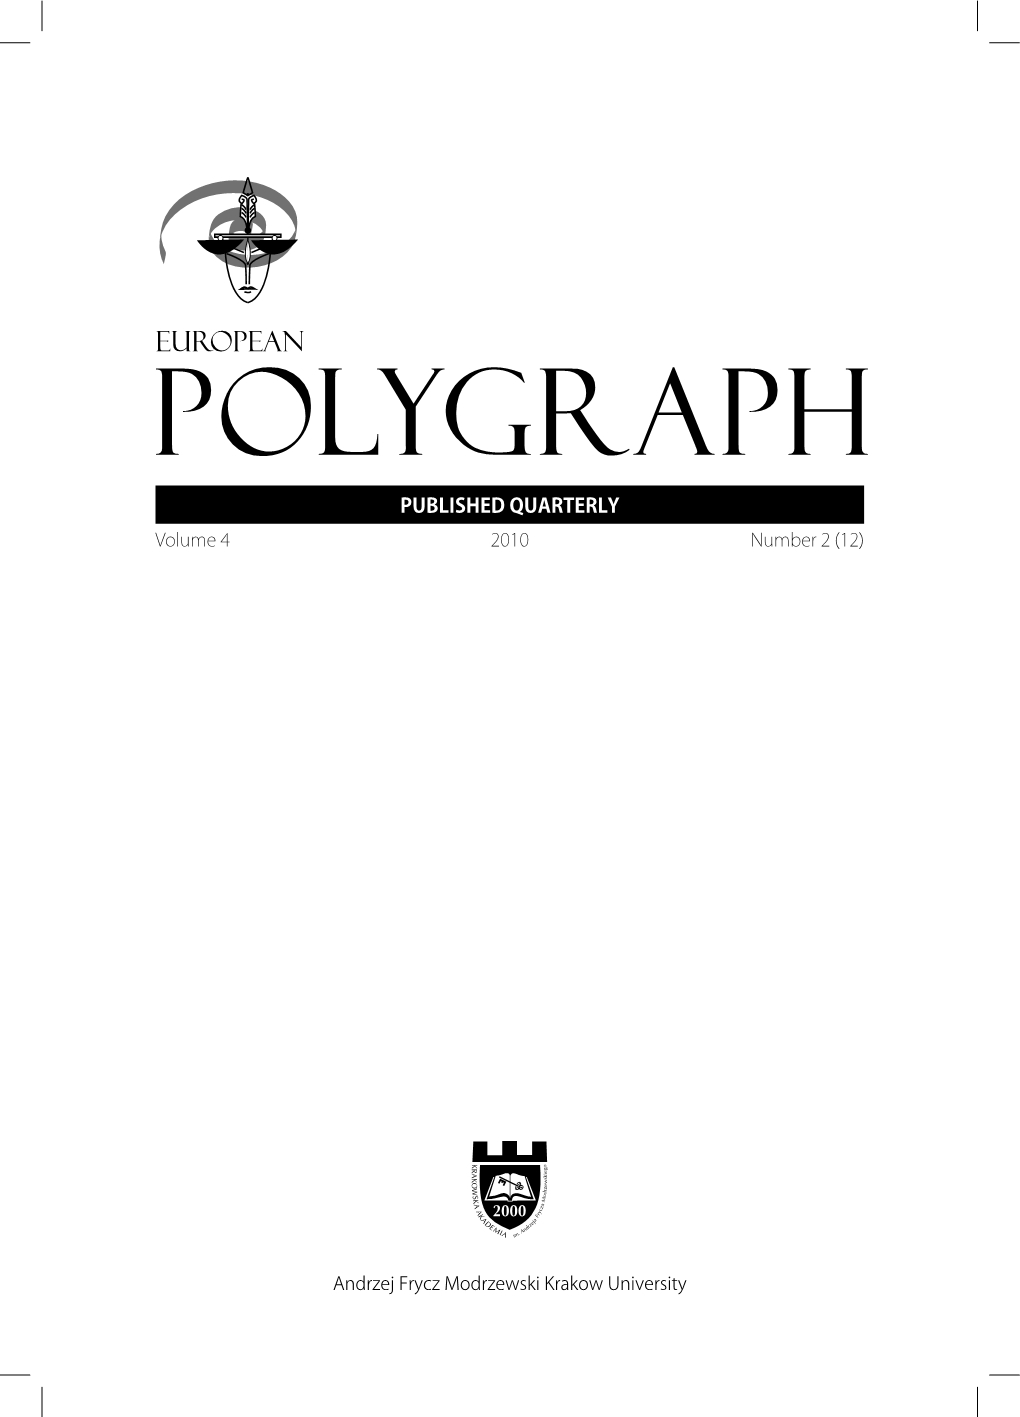 A Comparison of Polygraph Examination Accuracy Rates Obtained Using the Seven-position Numerical Analysis Scale and the Objective Scoring System (A Study on the Polish Population) Cover Image